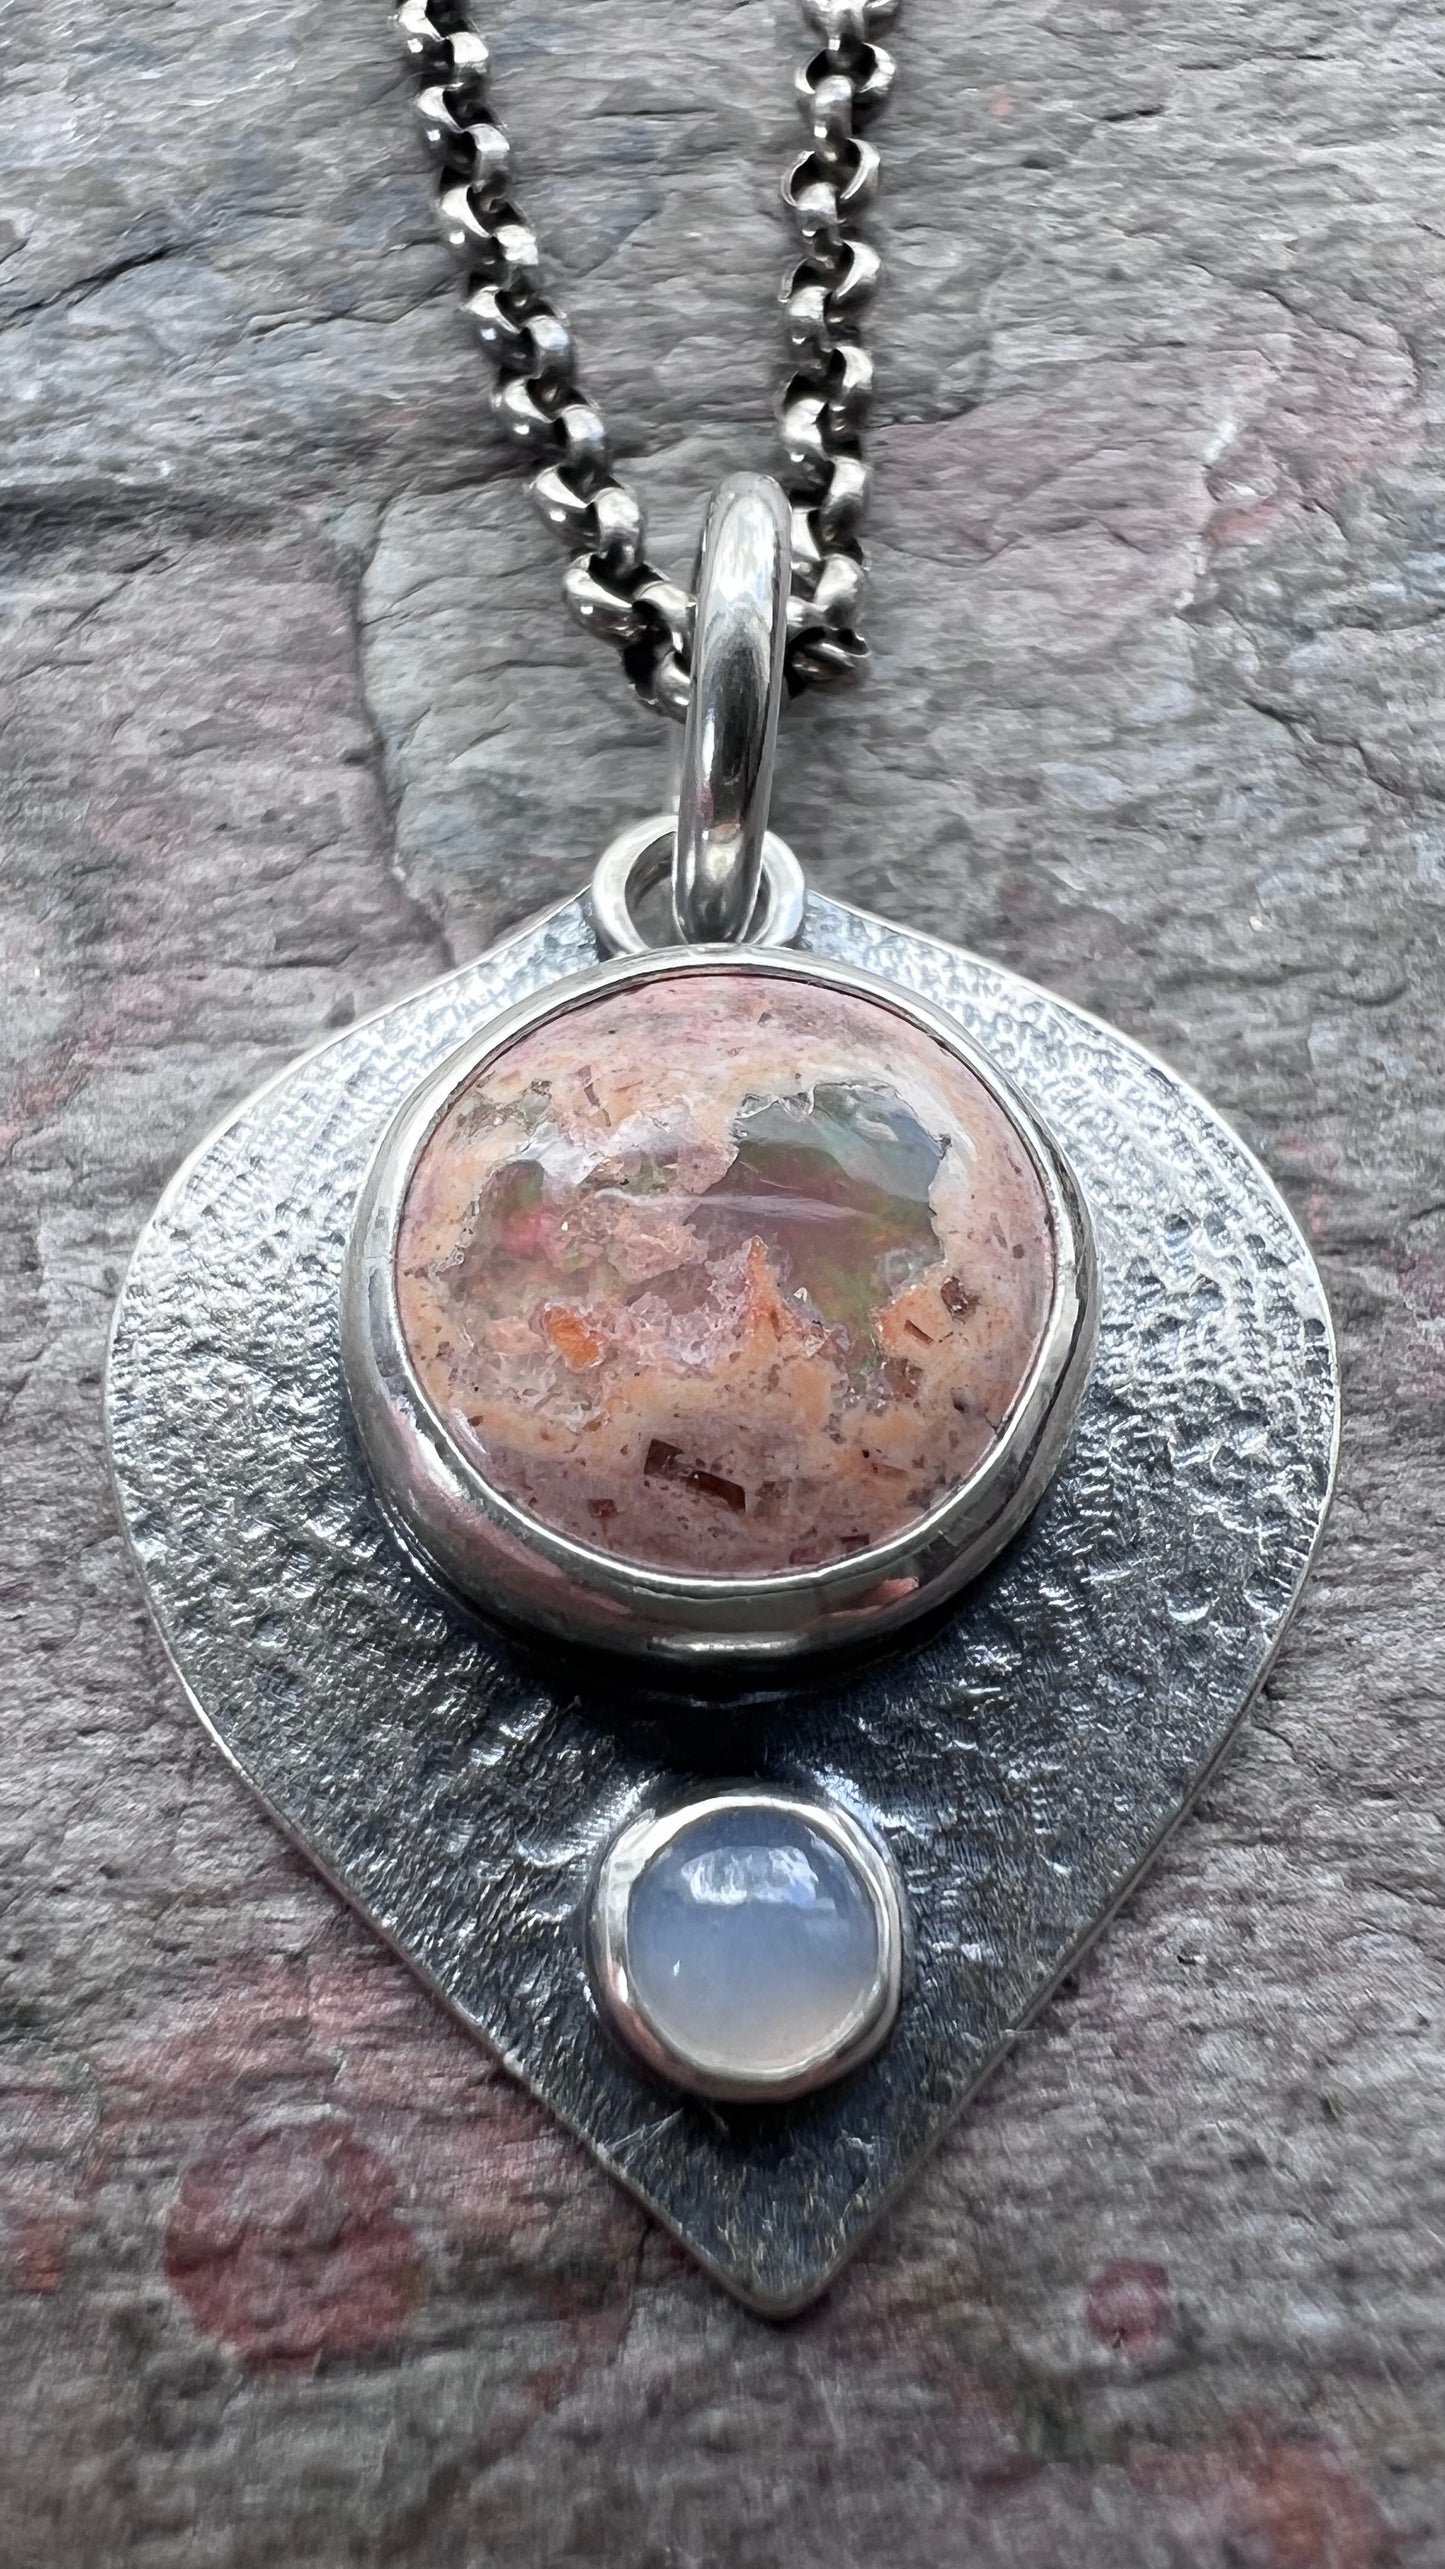 Mexican Opal and Chalcedony Sterling Silver Necklace - Handmade One-of-a-kind Pendant on Sterling Silver Chain